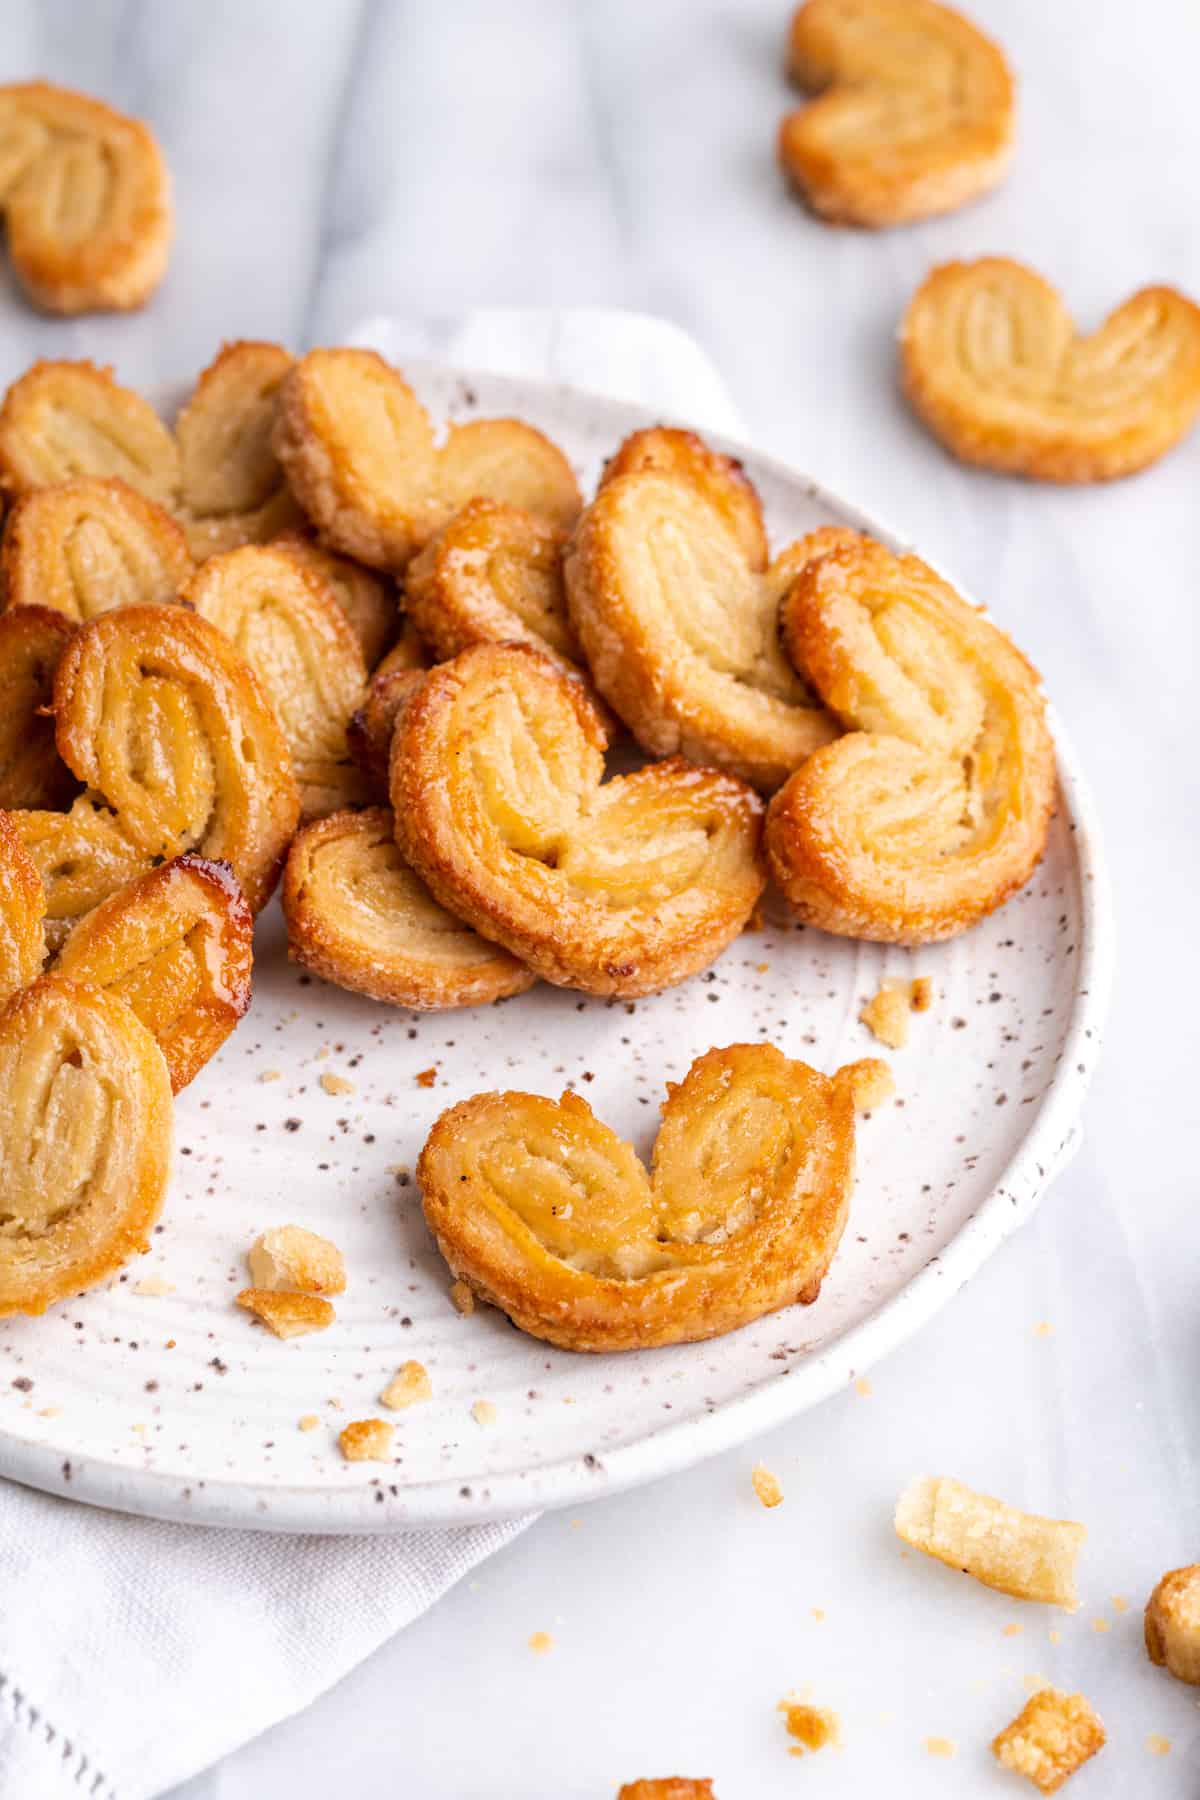 A plate with a pile of puff pastry palmiers, one palmier at the front, and lots of palmiers surrounding it